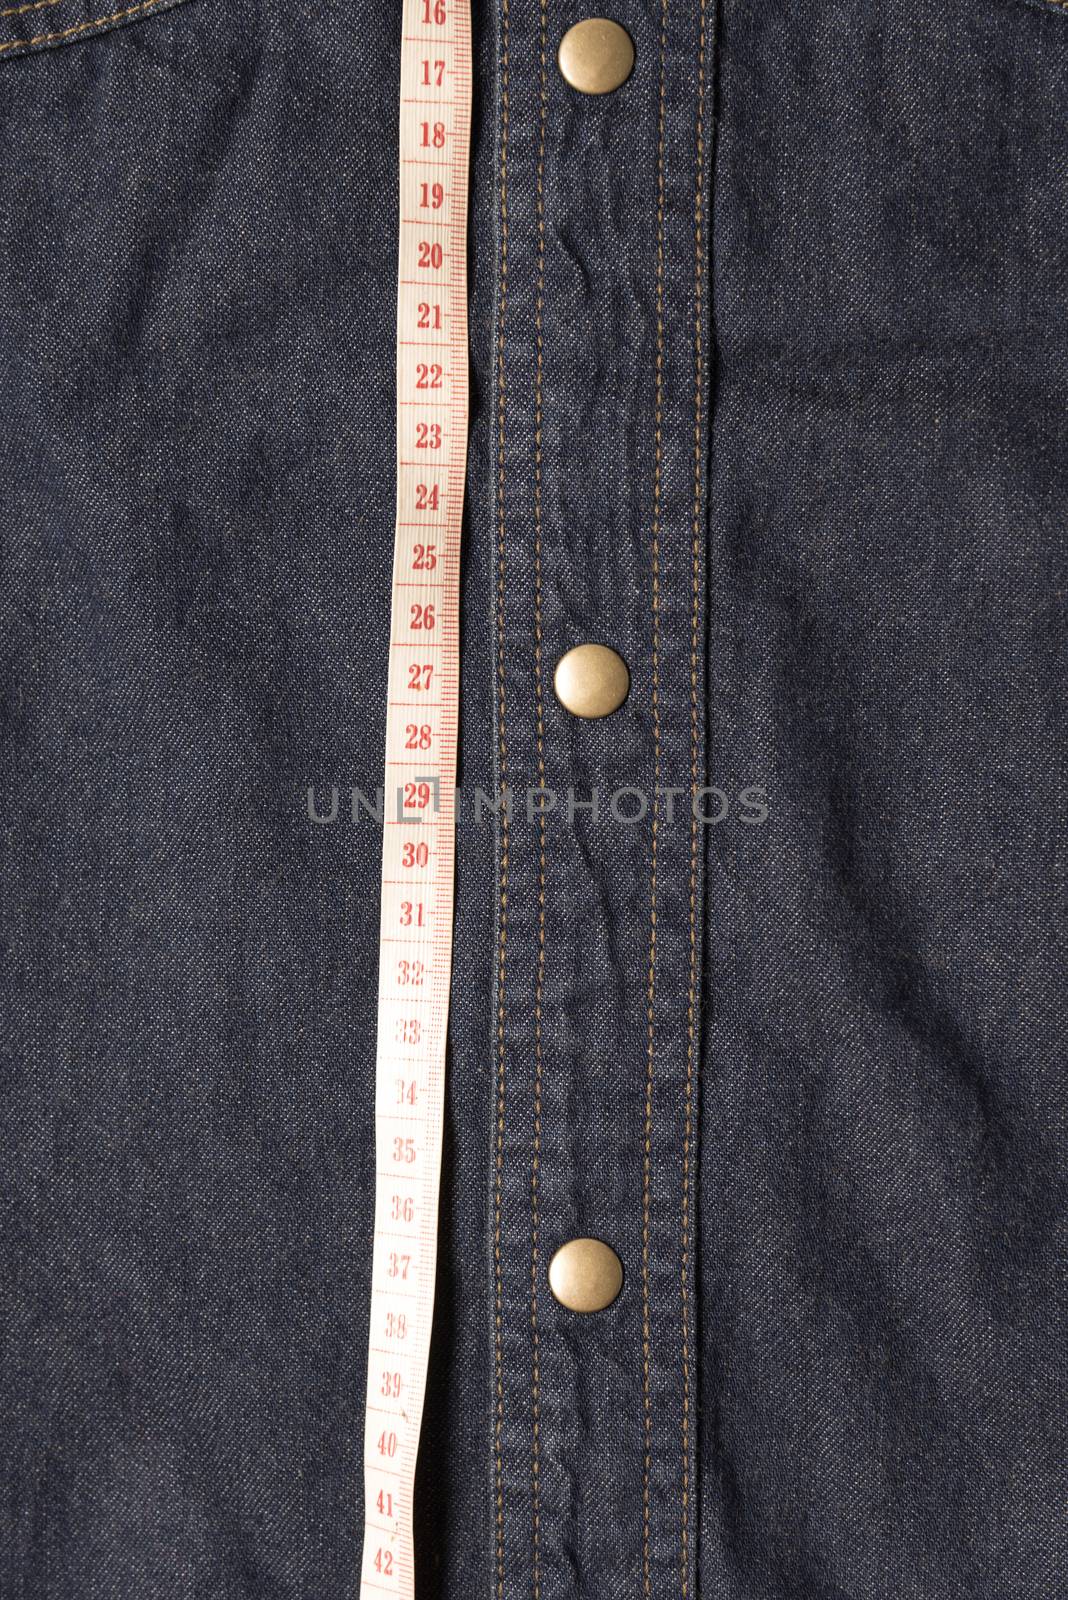 measuring tape and jean texture